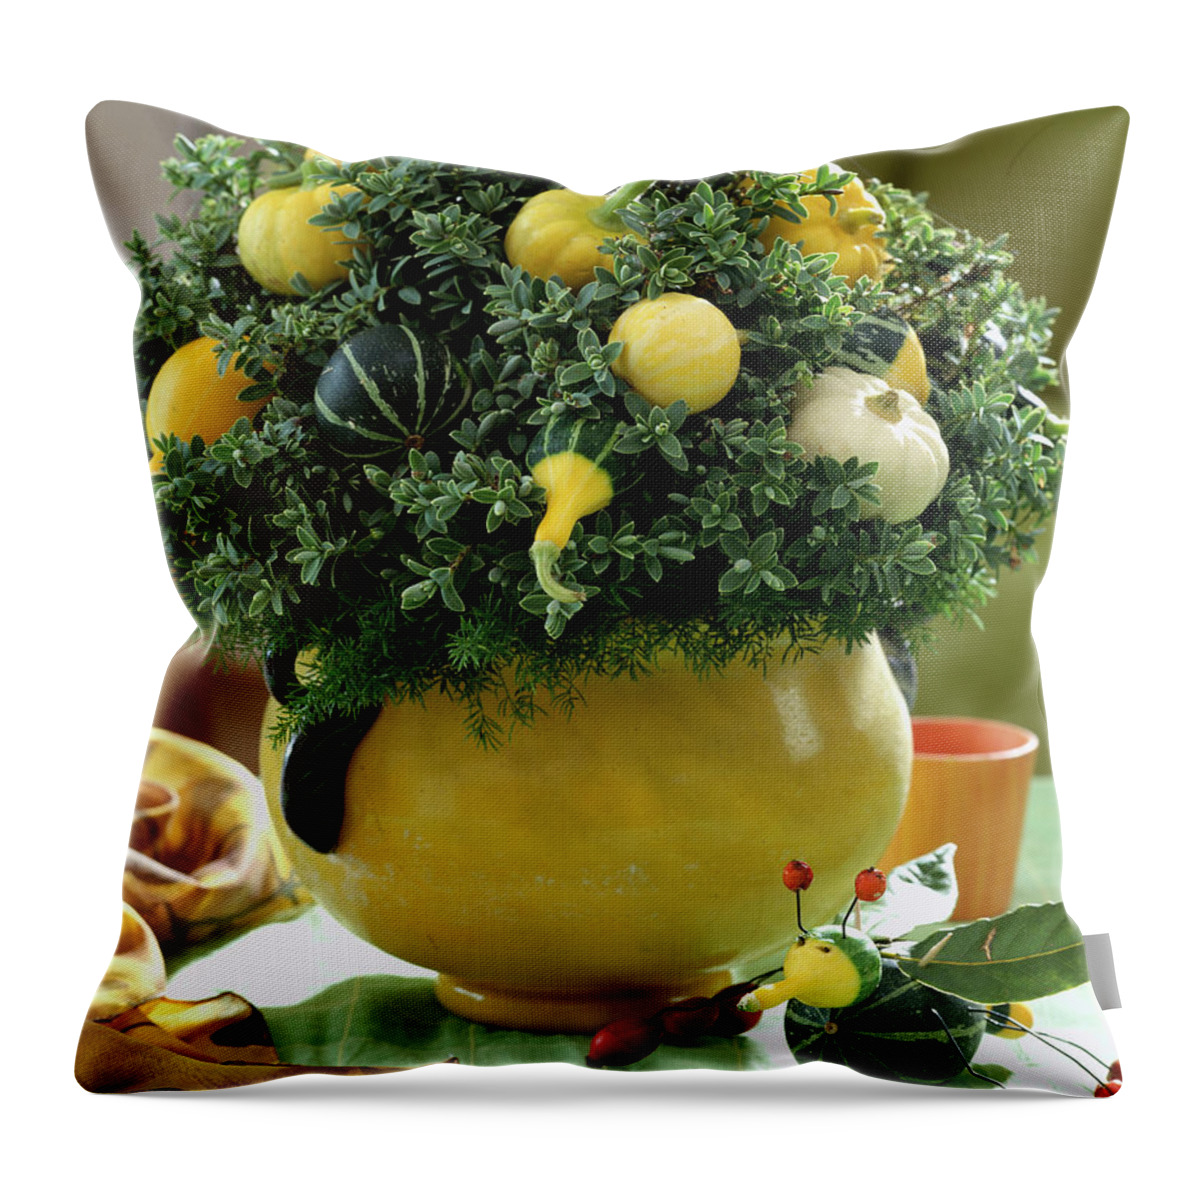 Ip_00272424 Throw Pillow featuring the photograph Hebe With Ornamental Gourds by Strauss, Friedrich